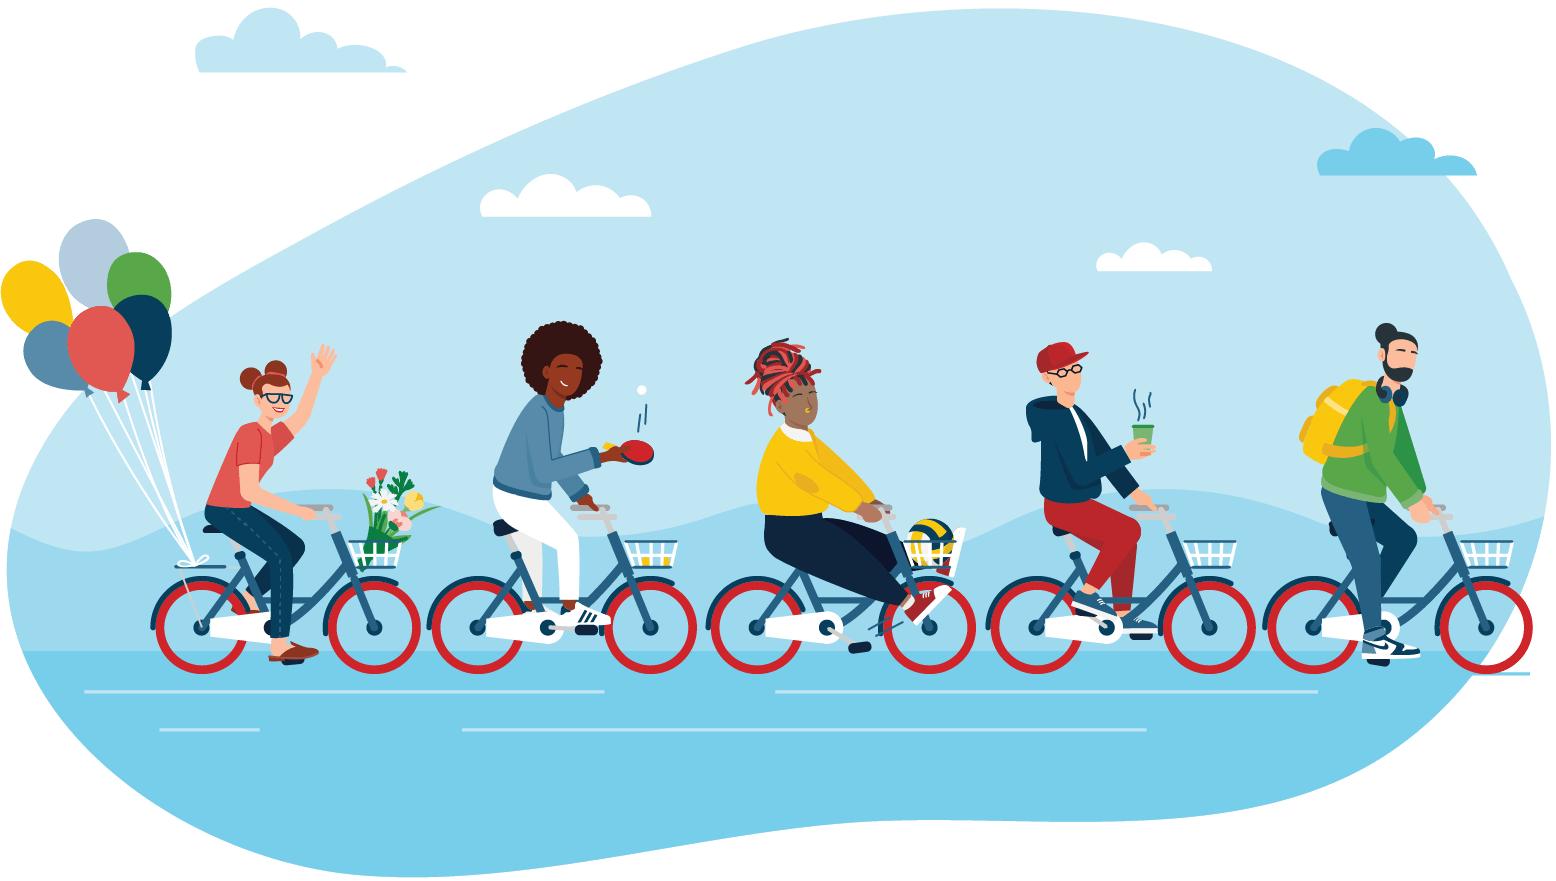 Illustration of group of people on bicycles, riding together.